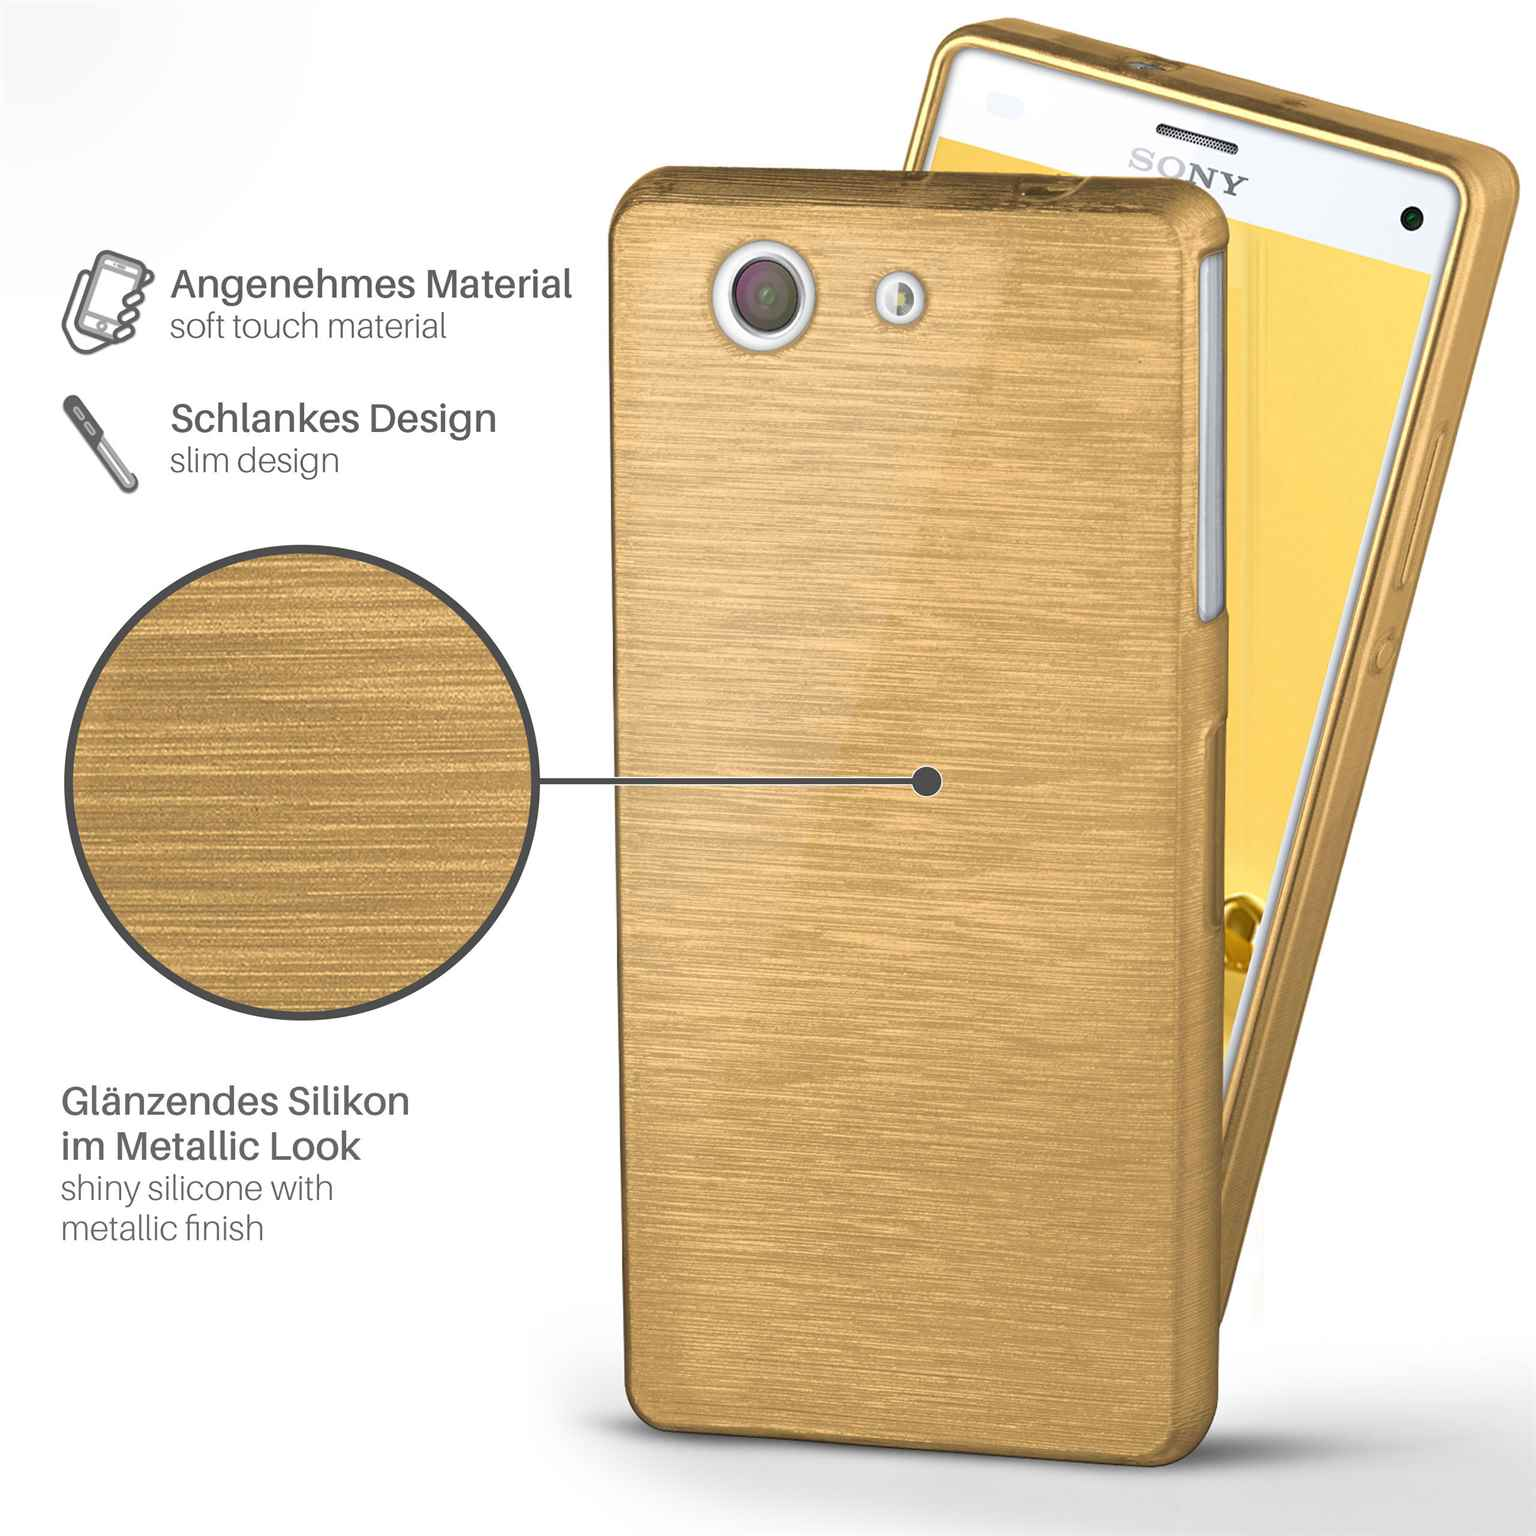 MOEX Brushed Case, Sony, Xperia Compact, Ivory-Gold Backcover, Z3